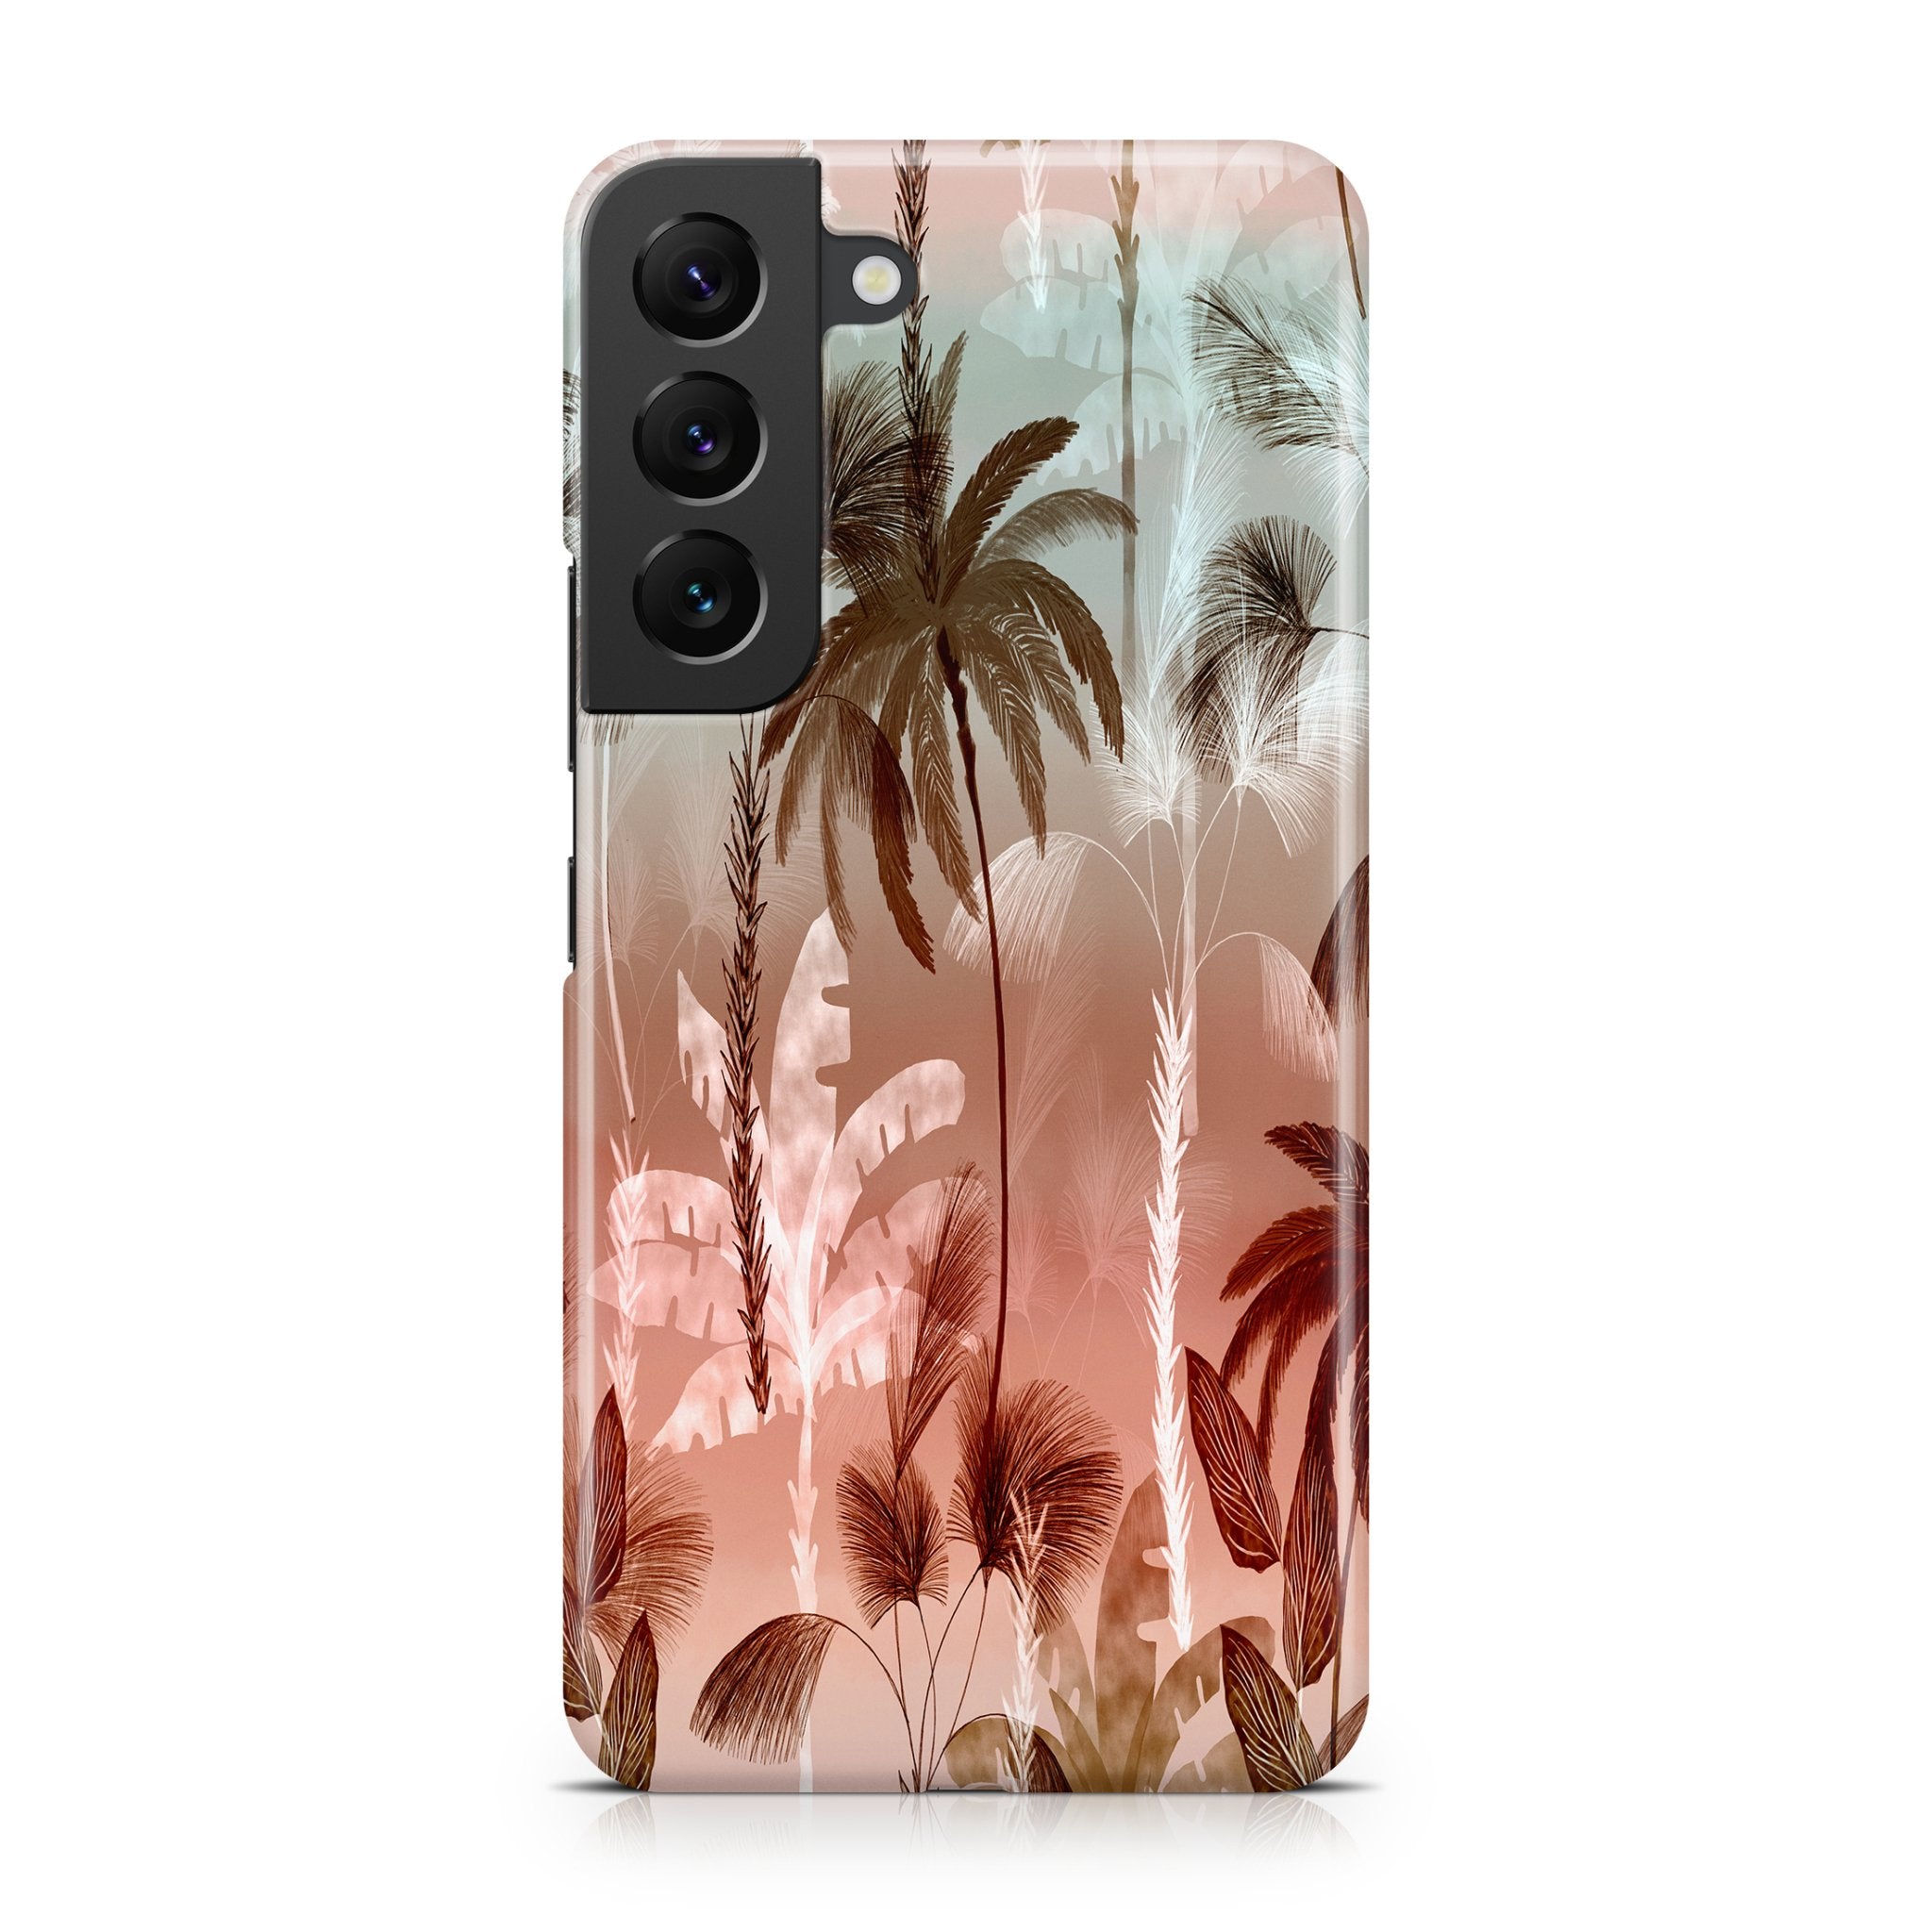 Sunset Tropical - Samsung phone case designs by CaseSwagger